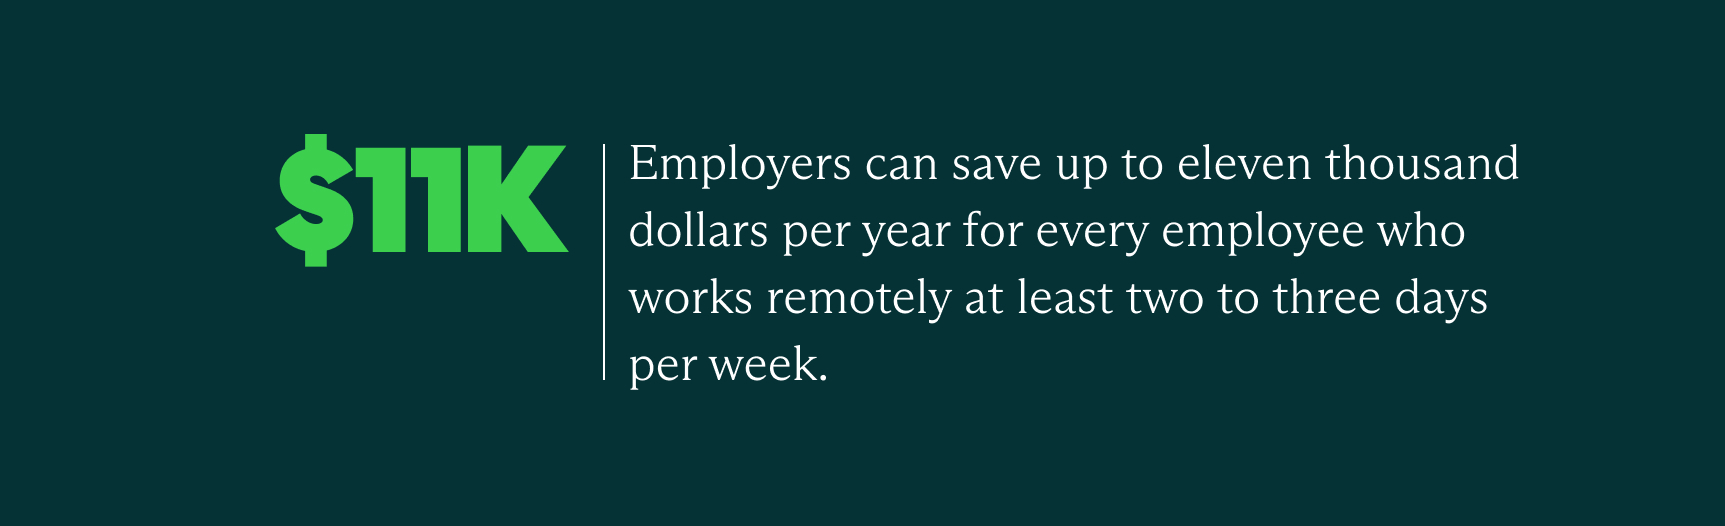 Graphic that says employers can save up to $11K per year for every employee who works remotely 2-3 days per week.